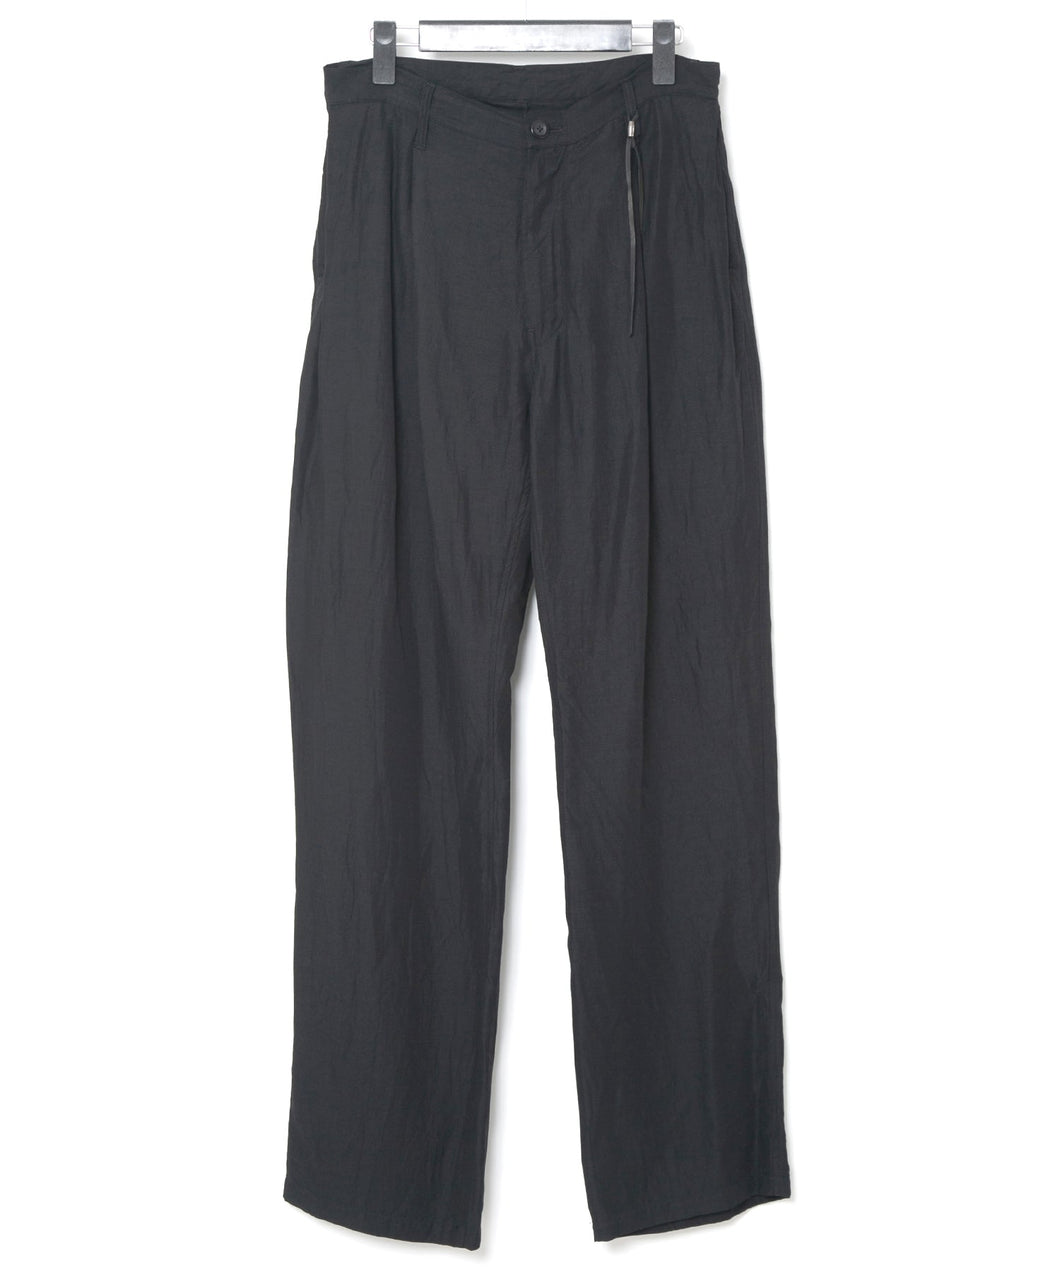 Washer Dyed Rayon&Linen Cloth Wide Pants - BLACK